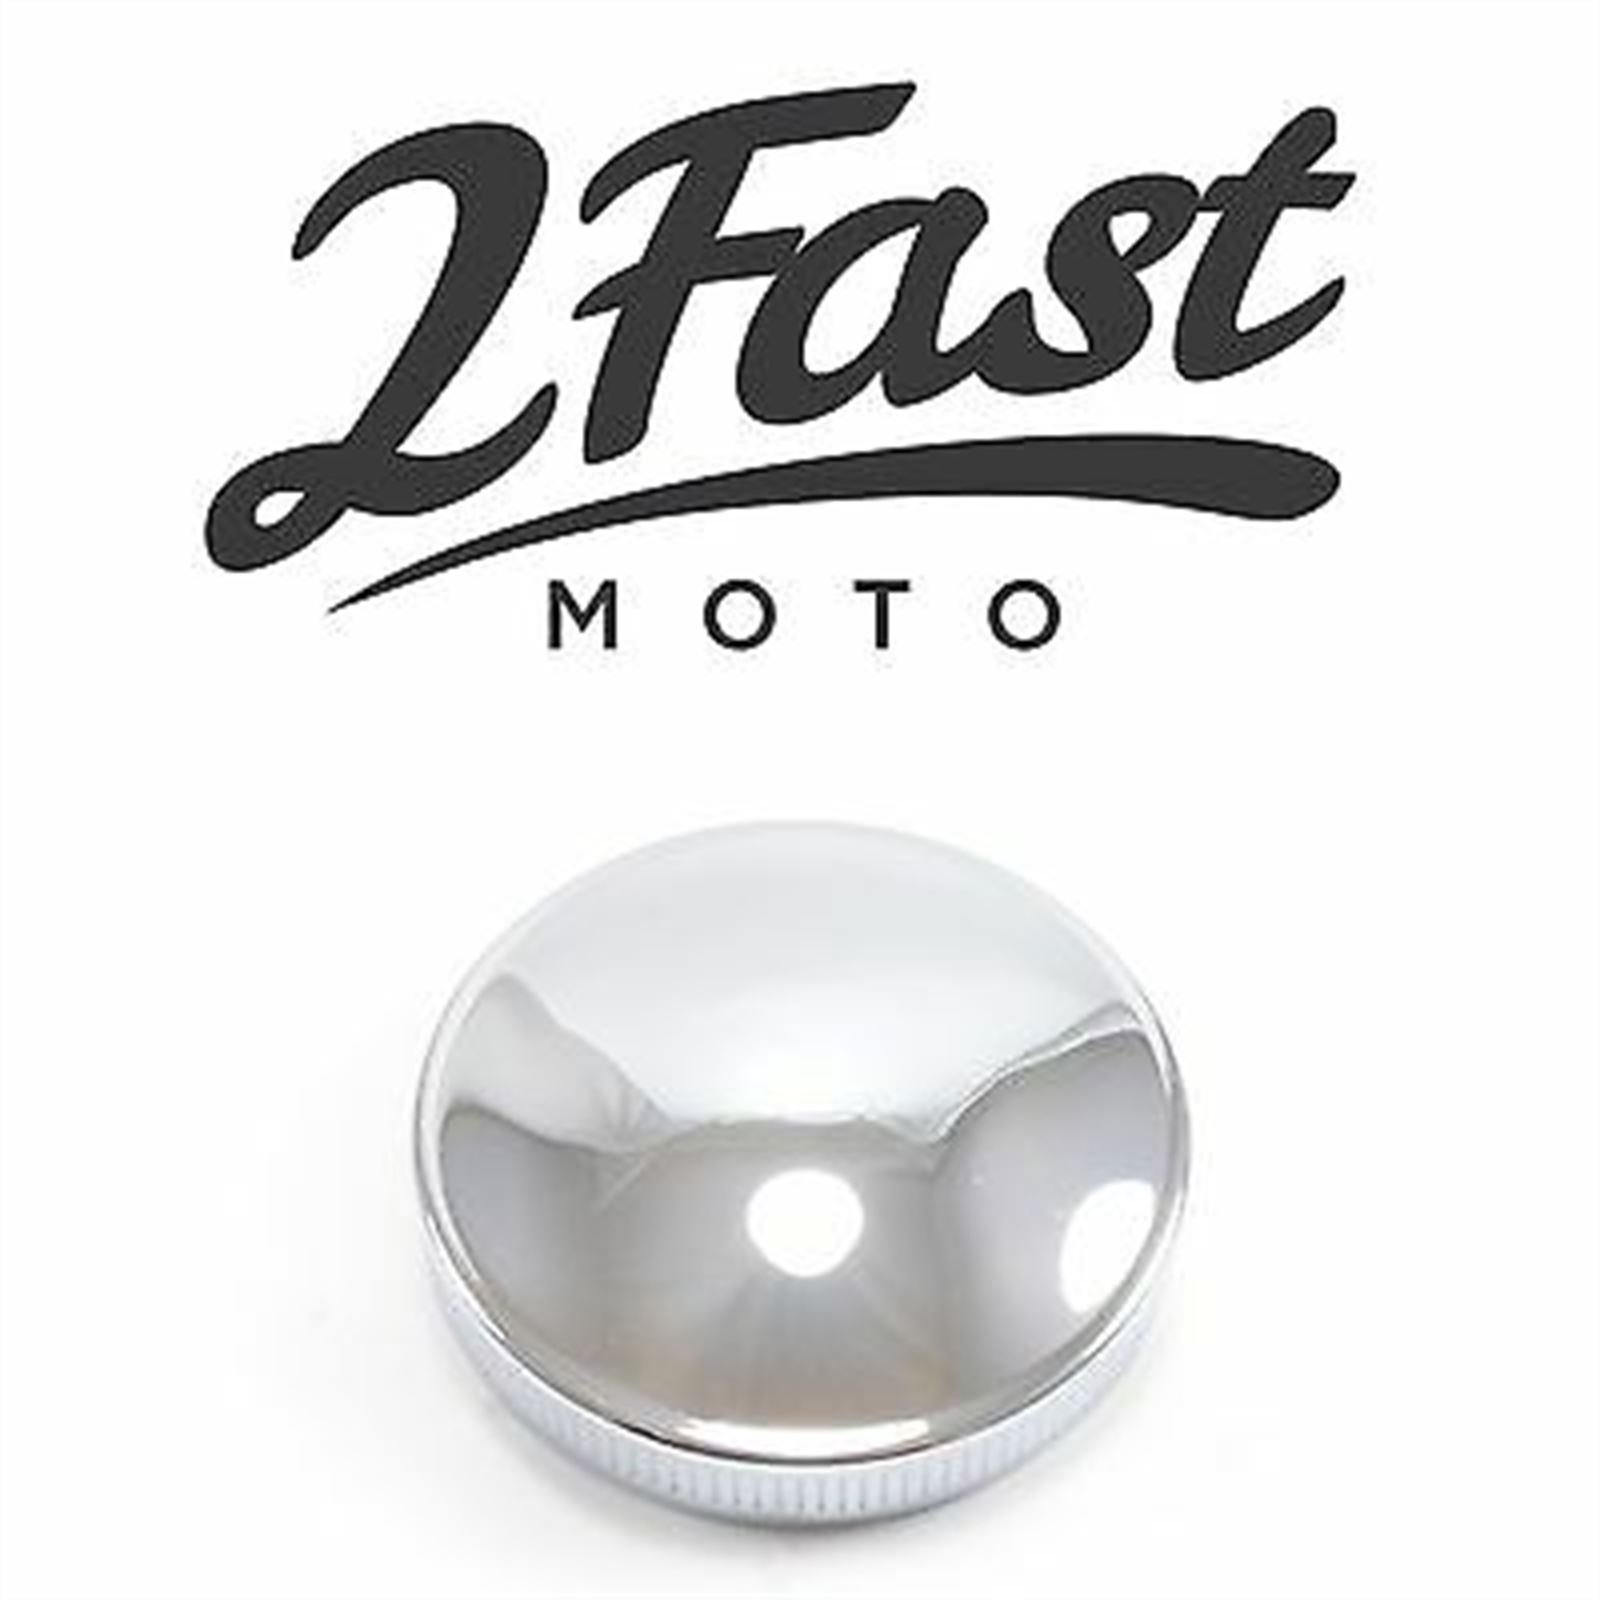 Quickbob™ Rubber-Mount Gas Tank for Sportster